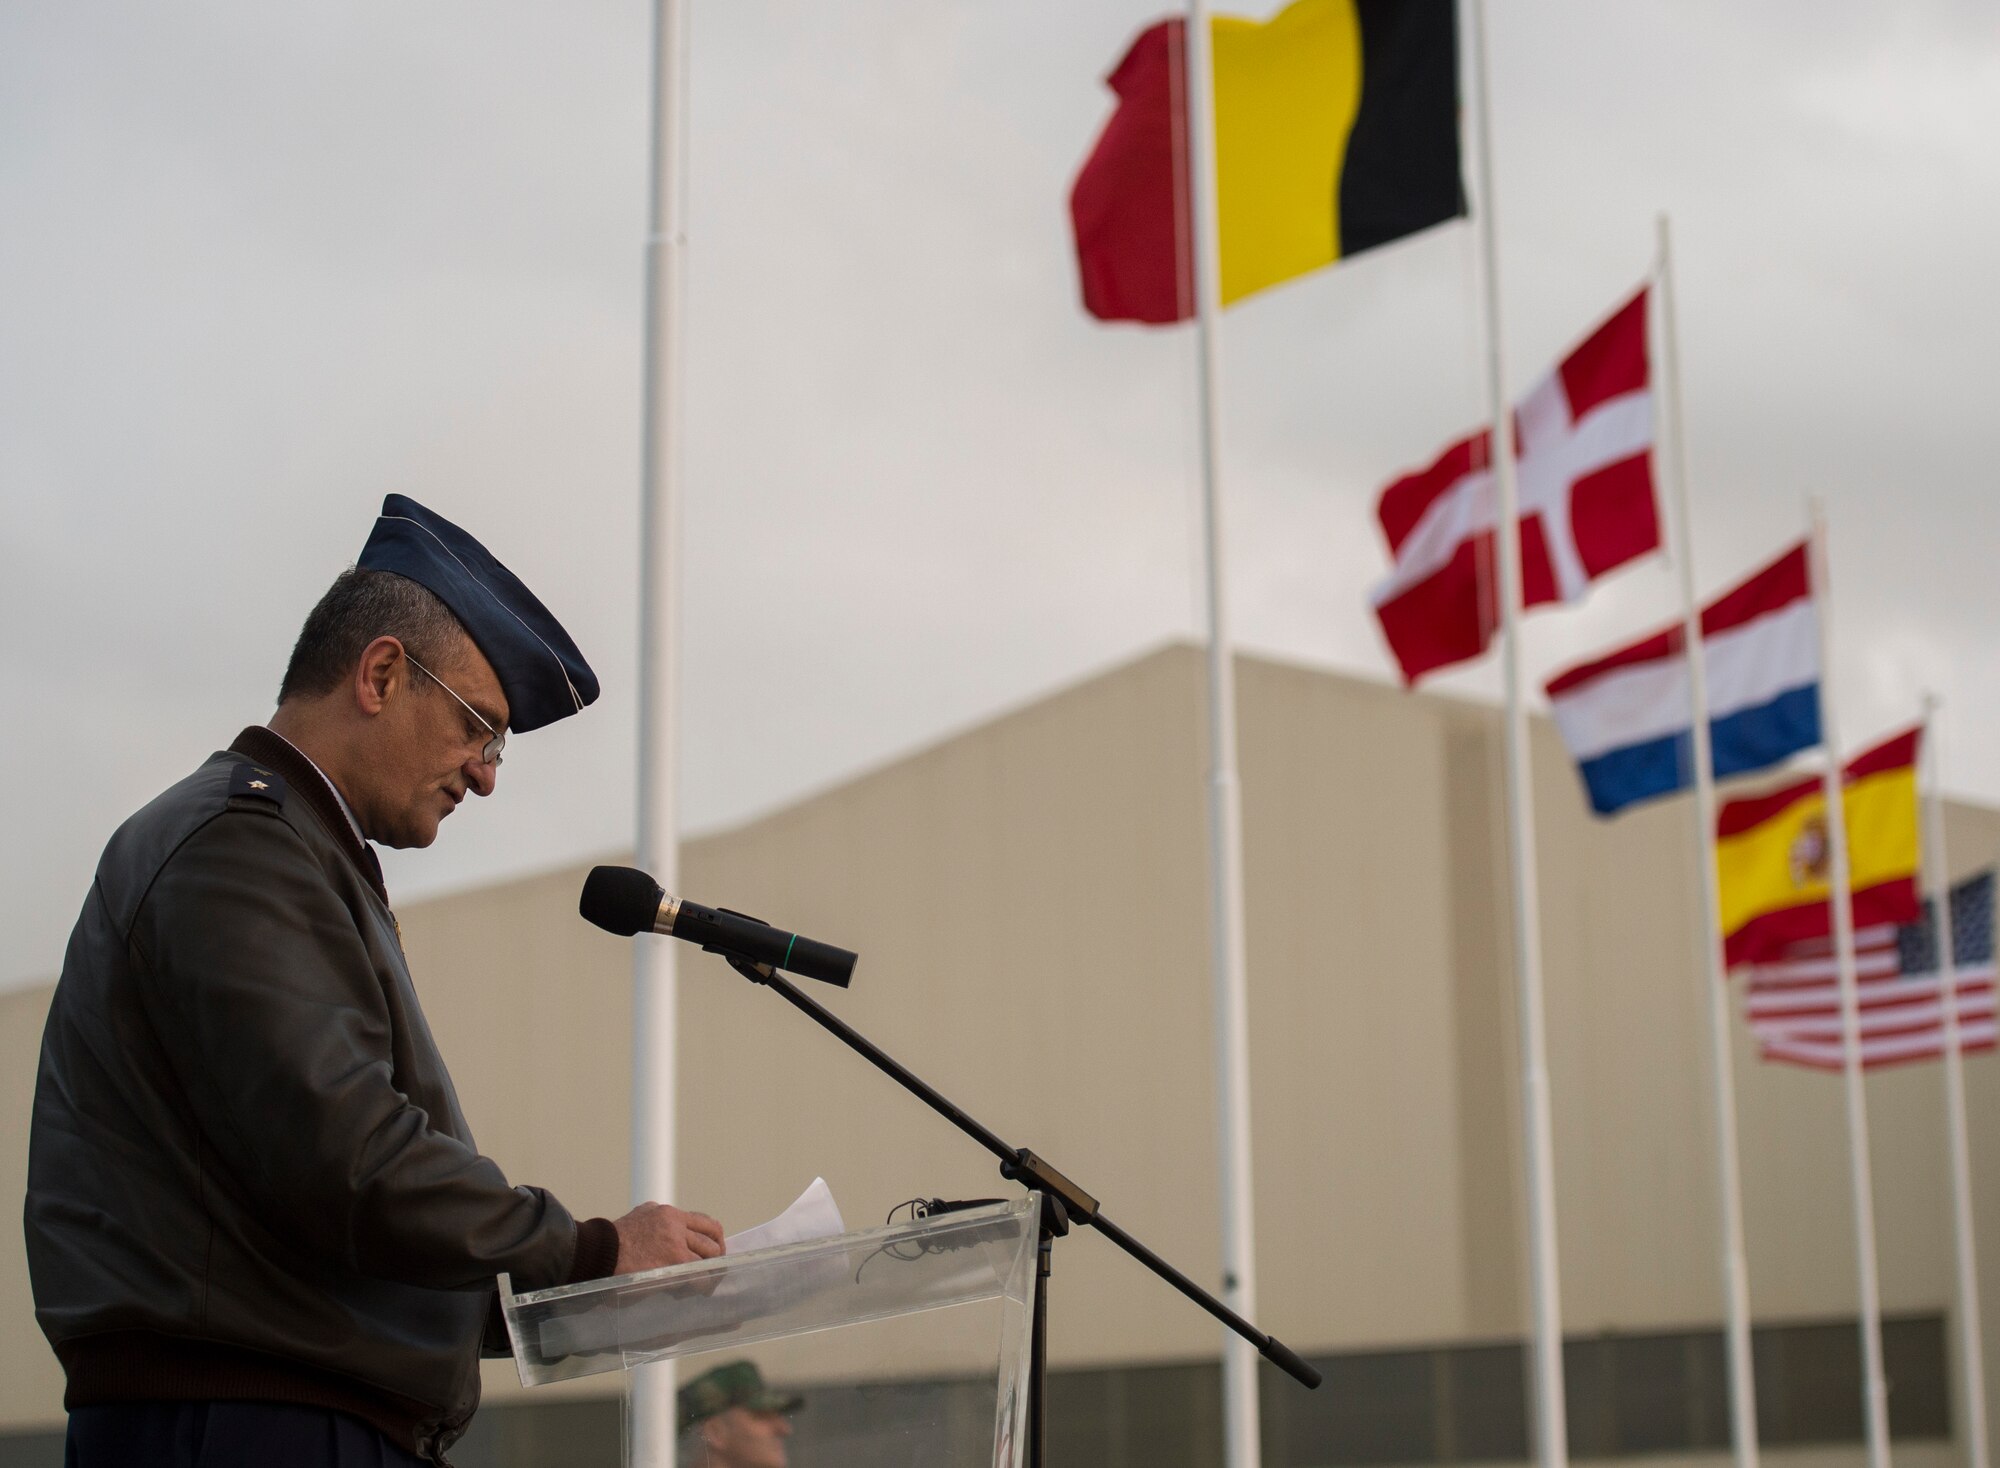 Brig. Gen. Barros Ferreira, Portuguese air force director of air operations, welcomes participating service members to exercise Real Thaw 16 during an opening ceremony in Beja, Portugal, Feb. 21. Real Thaw 16 is a Portuguese-hosted NATO exercise that provides tactical training to multiple participating nations. Its aim is to merge and employ different aerial platforms towards one major objective, covering a vast range of activities to include Defensive and Offensive Counter Air Operations, High Value Air Assets Protection and a Slow Mover Protection. Nations participating this year include the U.S., Portugal, Belgium, Denmark, France, Netherlands, Norway and Spain. (U.S. Air Force photo/Senior Airman Jonathan Stefanko)